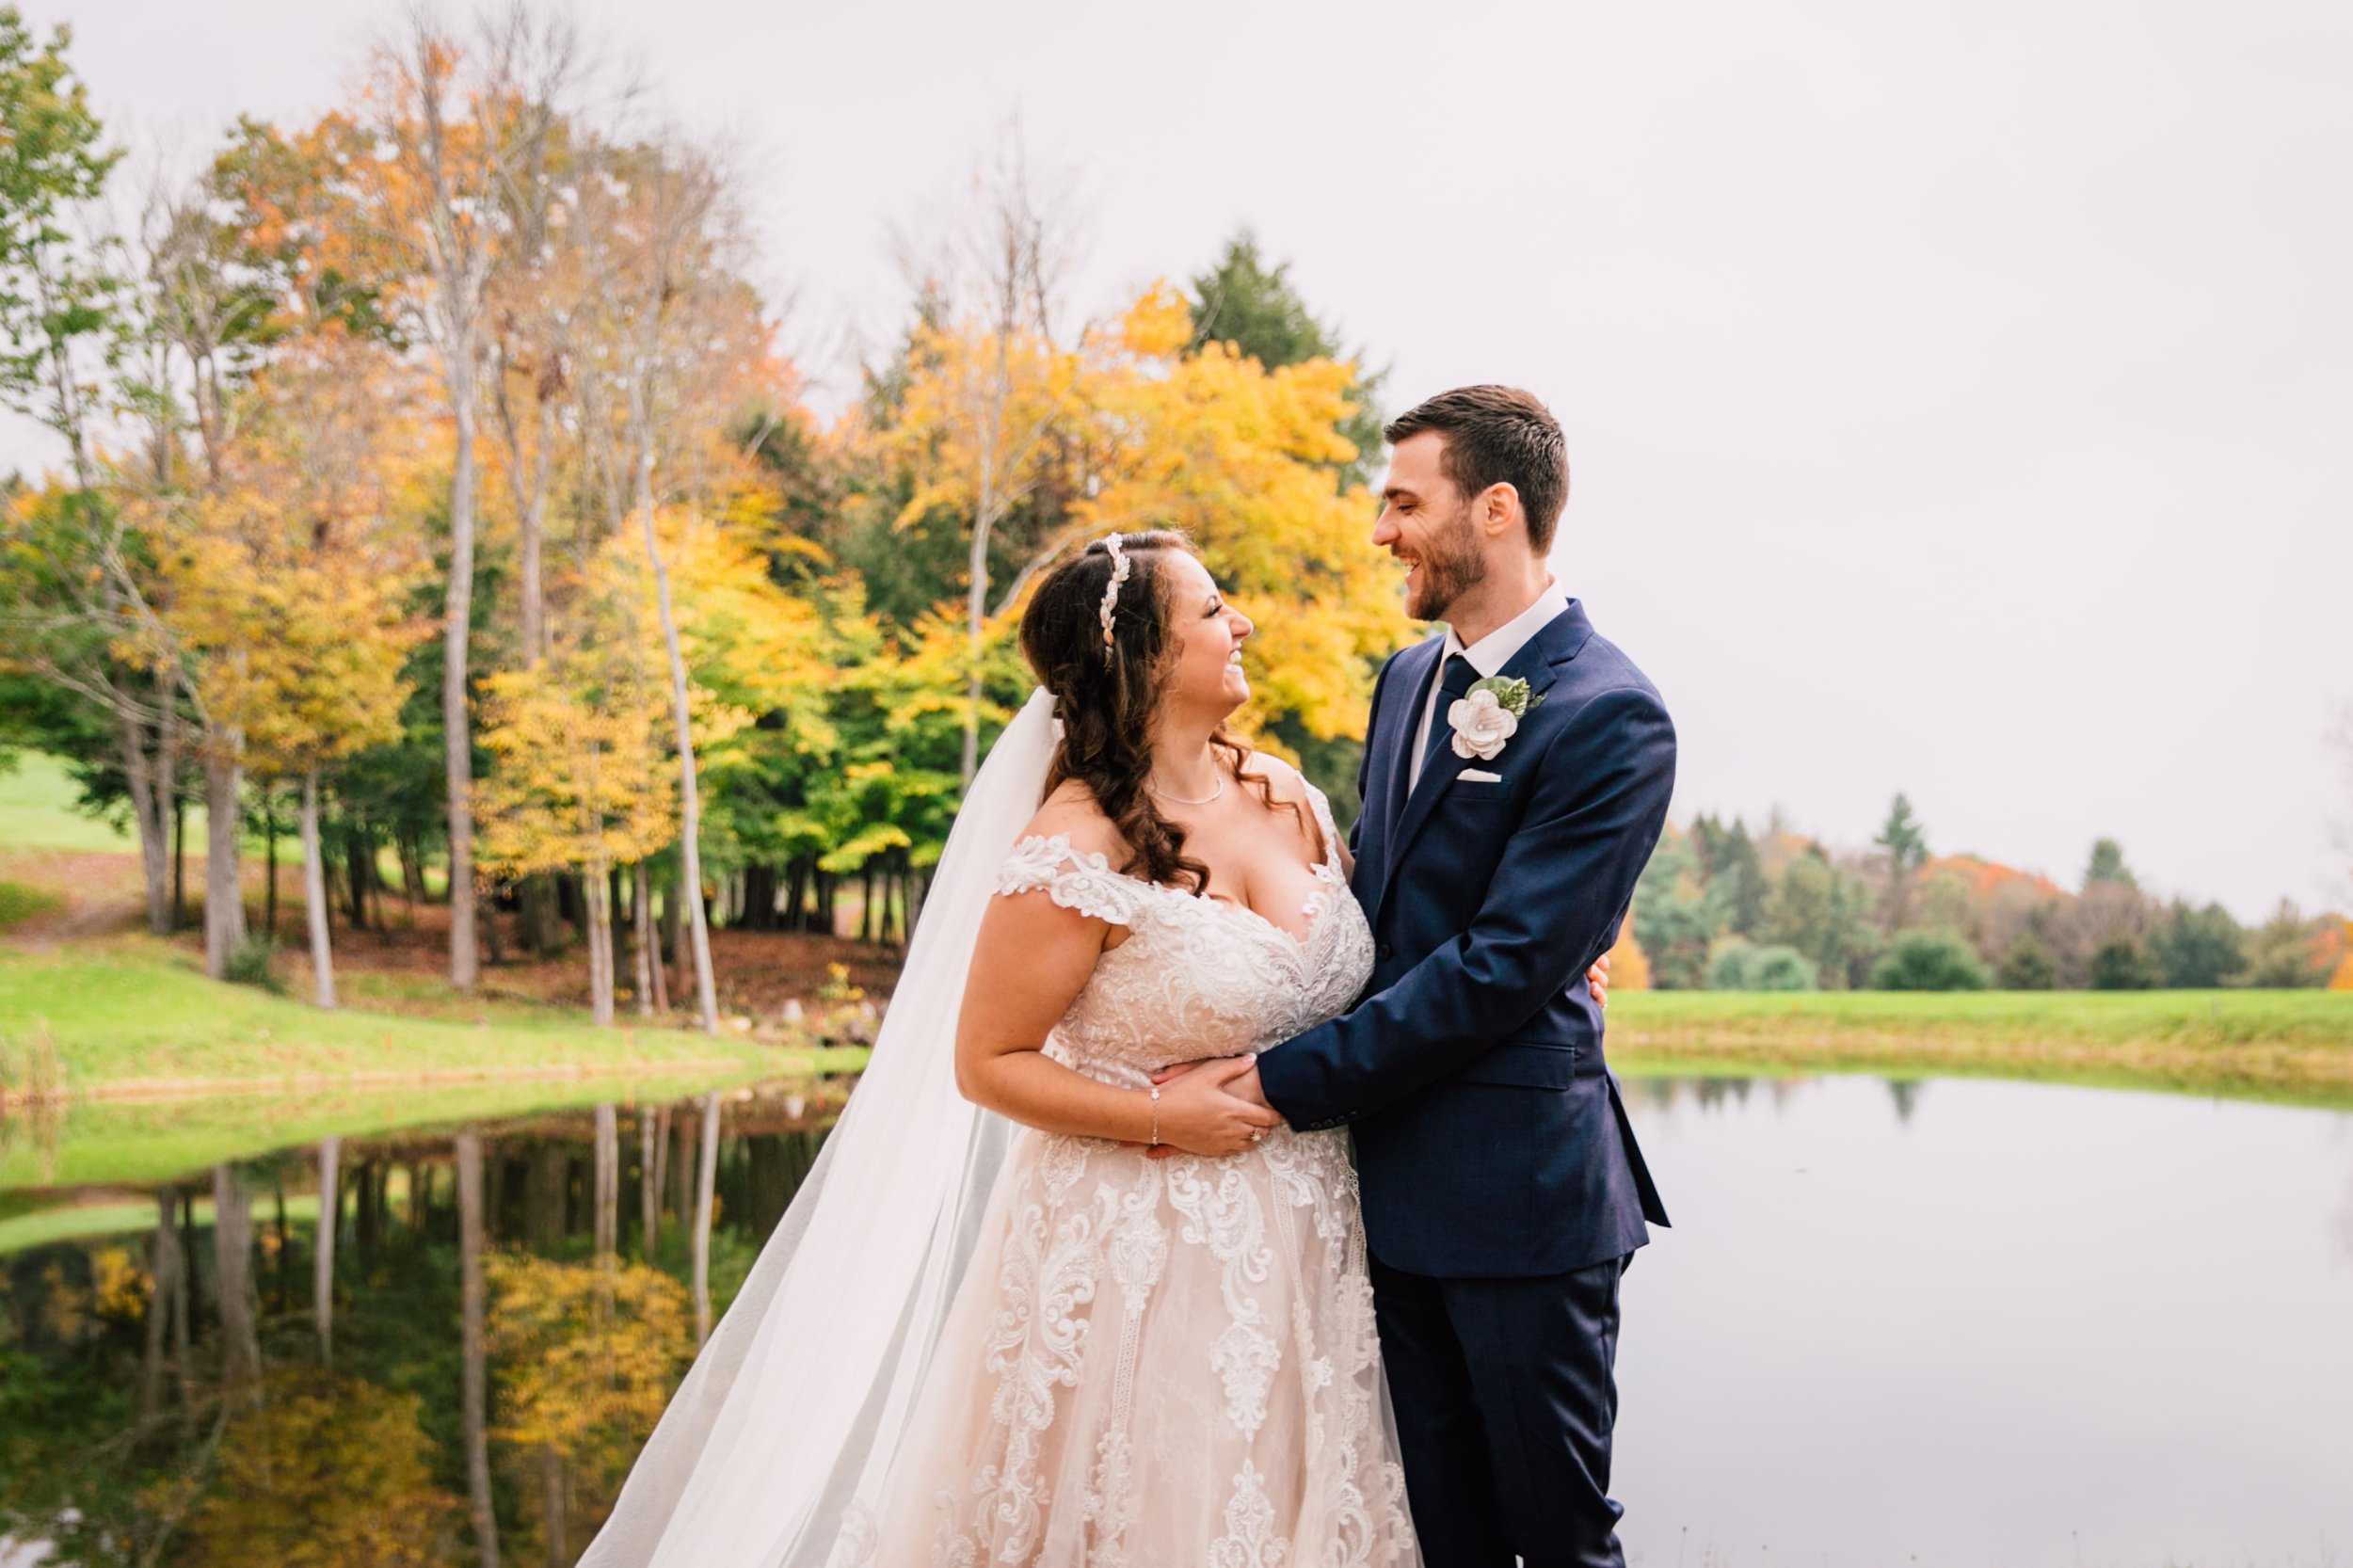  the bride and groom smile genuinely at each other as they stand in front of a small pond and fall foliage during their fall wedding photos 